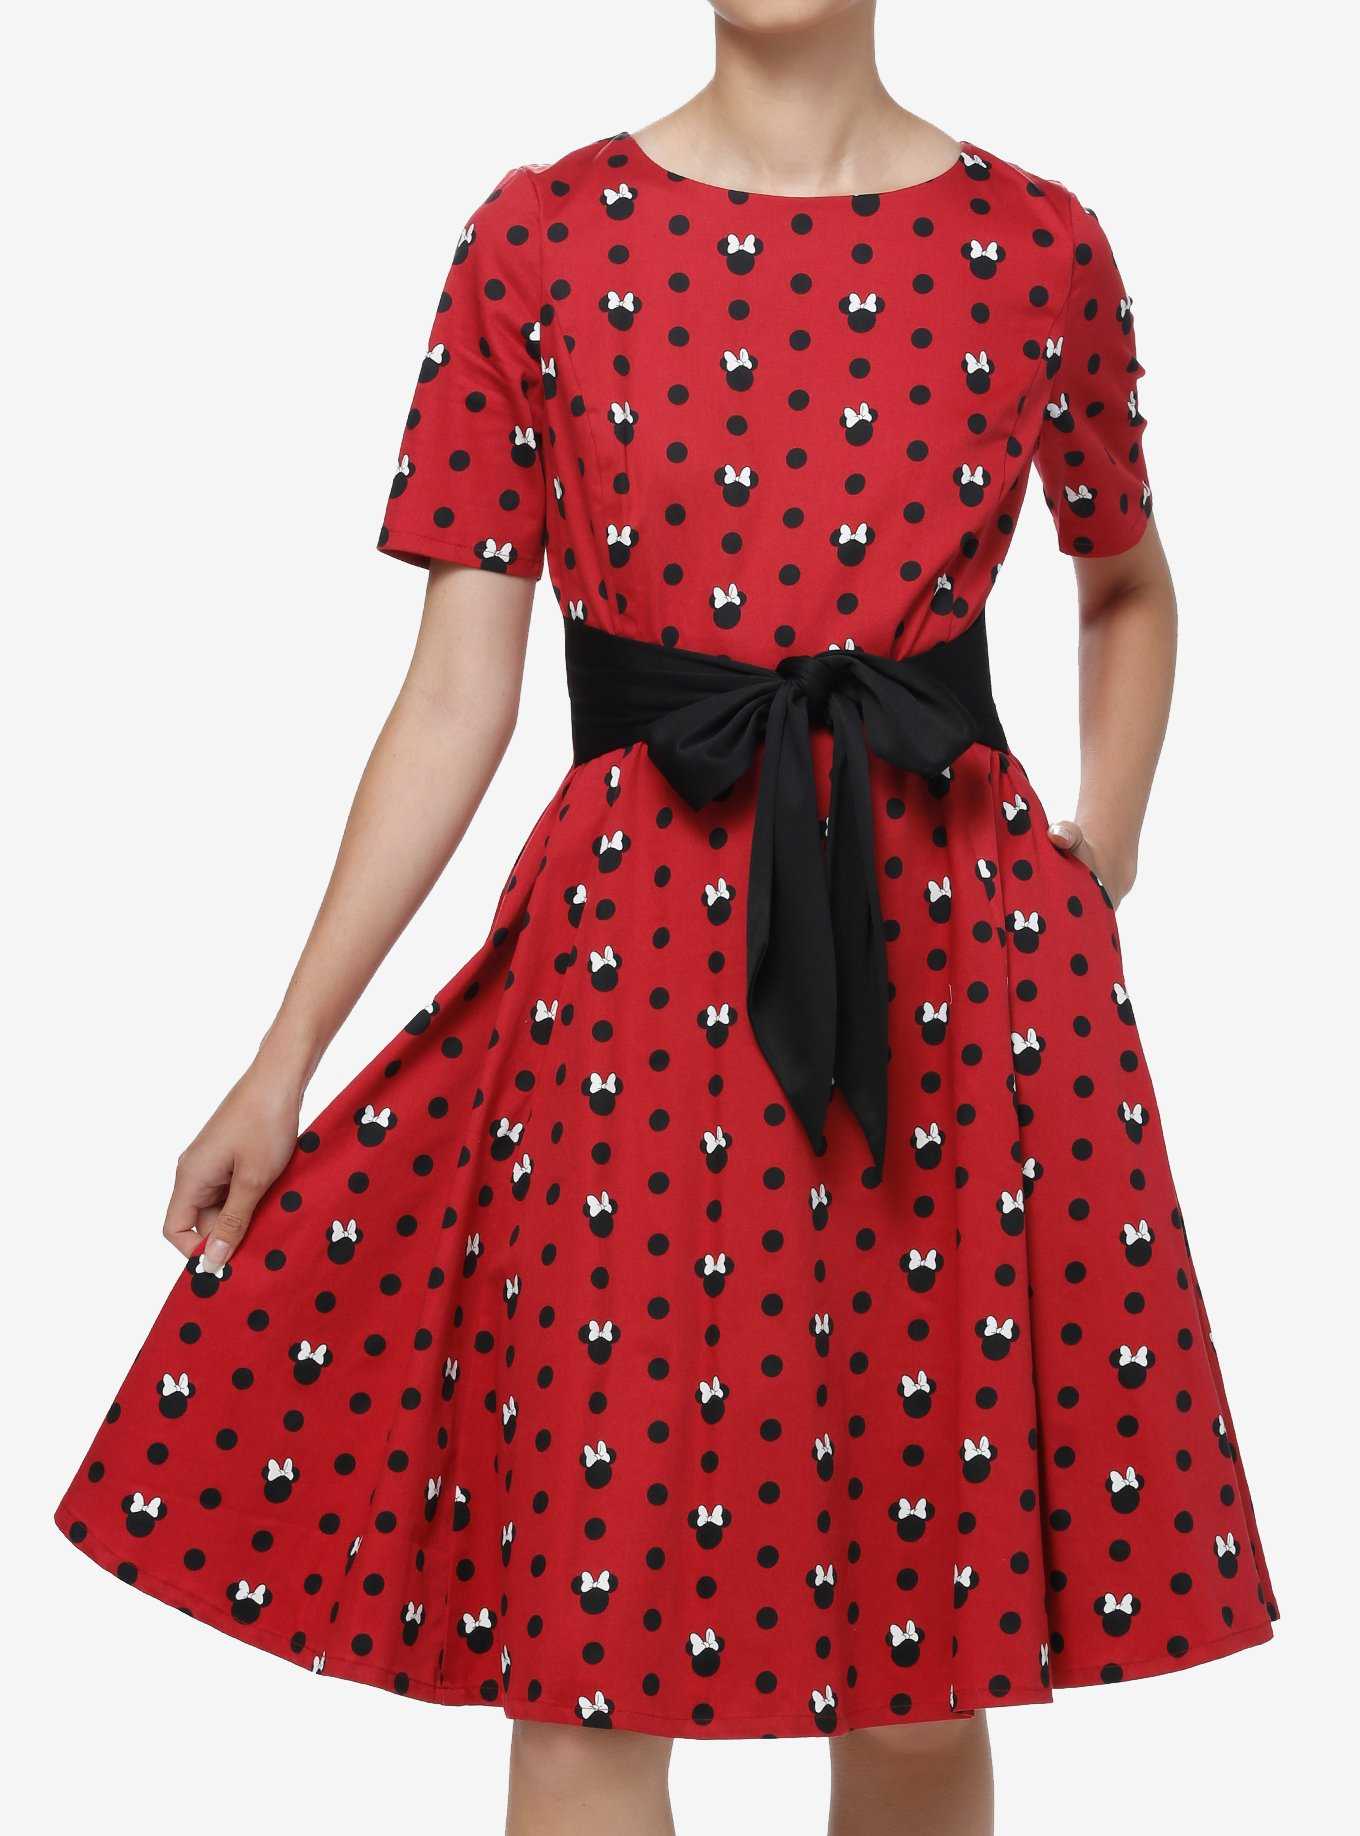 Her Universe Disney Minnie Mouse Polka Dot Retro Dress Her Universe Exclusive, , hi-res